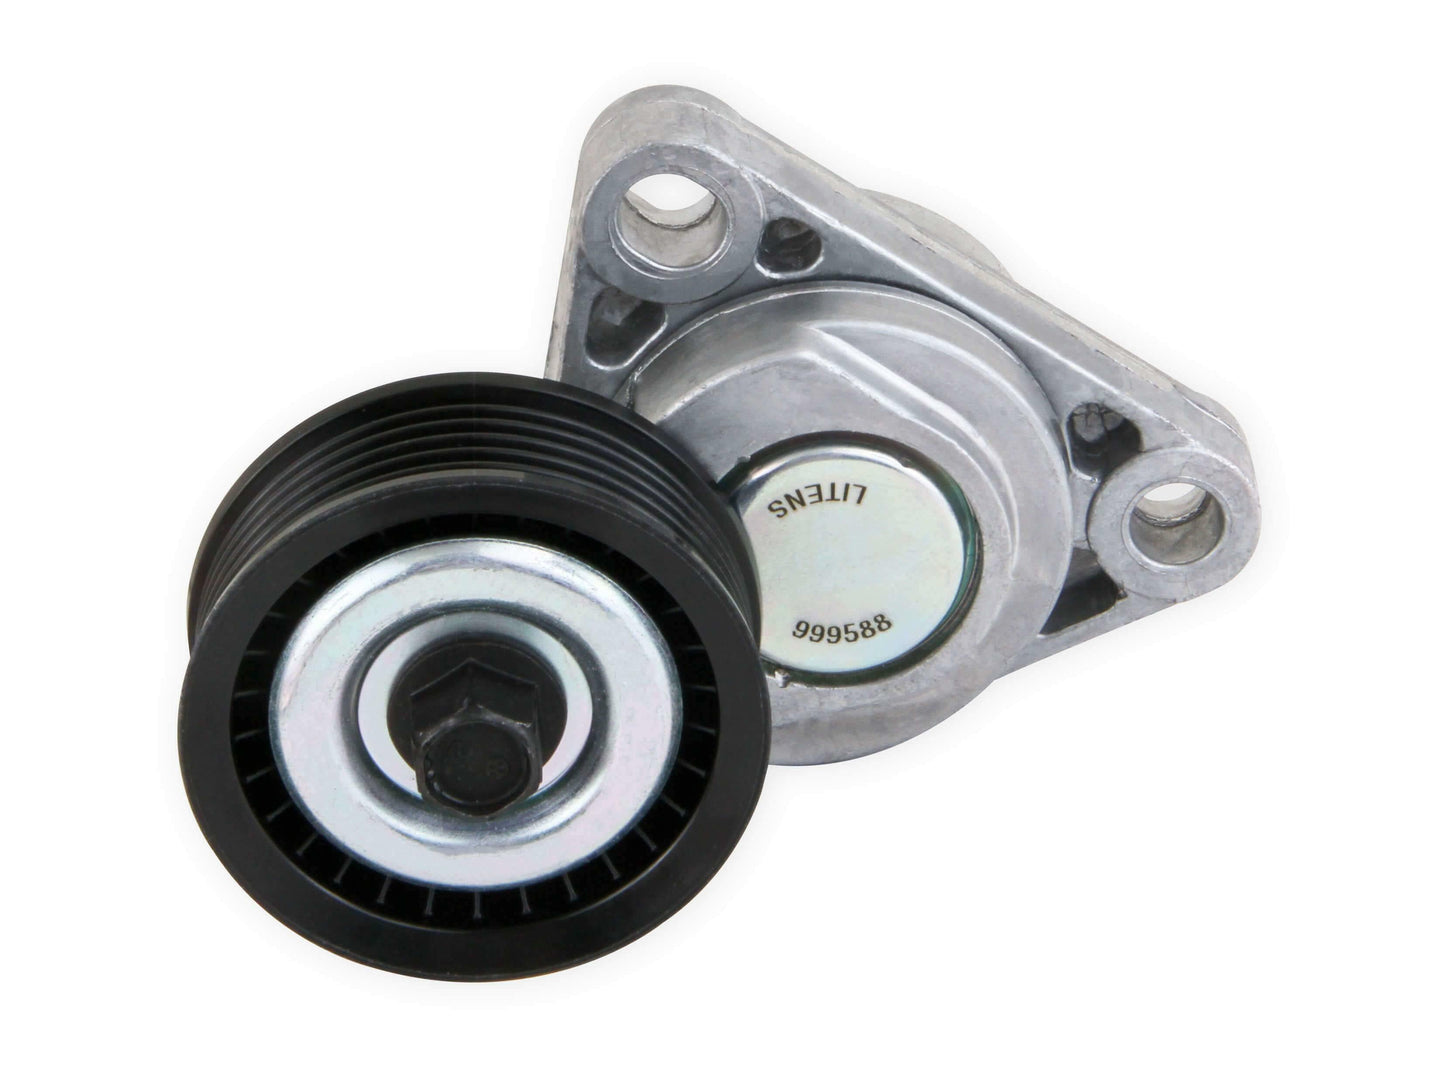 Tensioner Assembly - 97-151